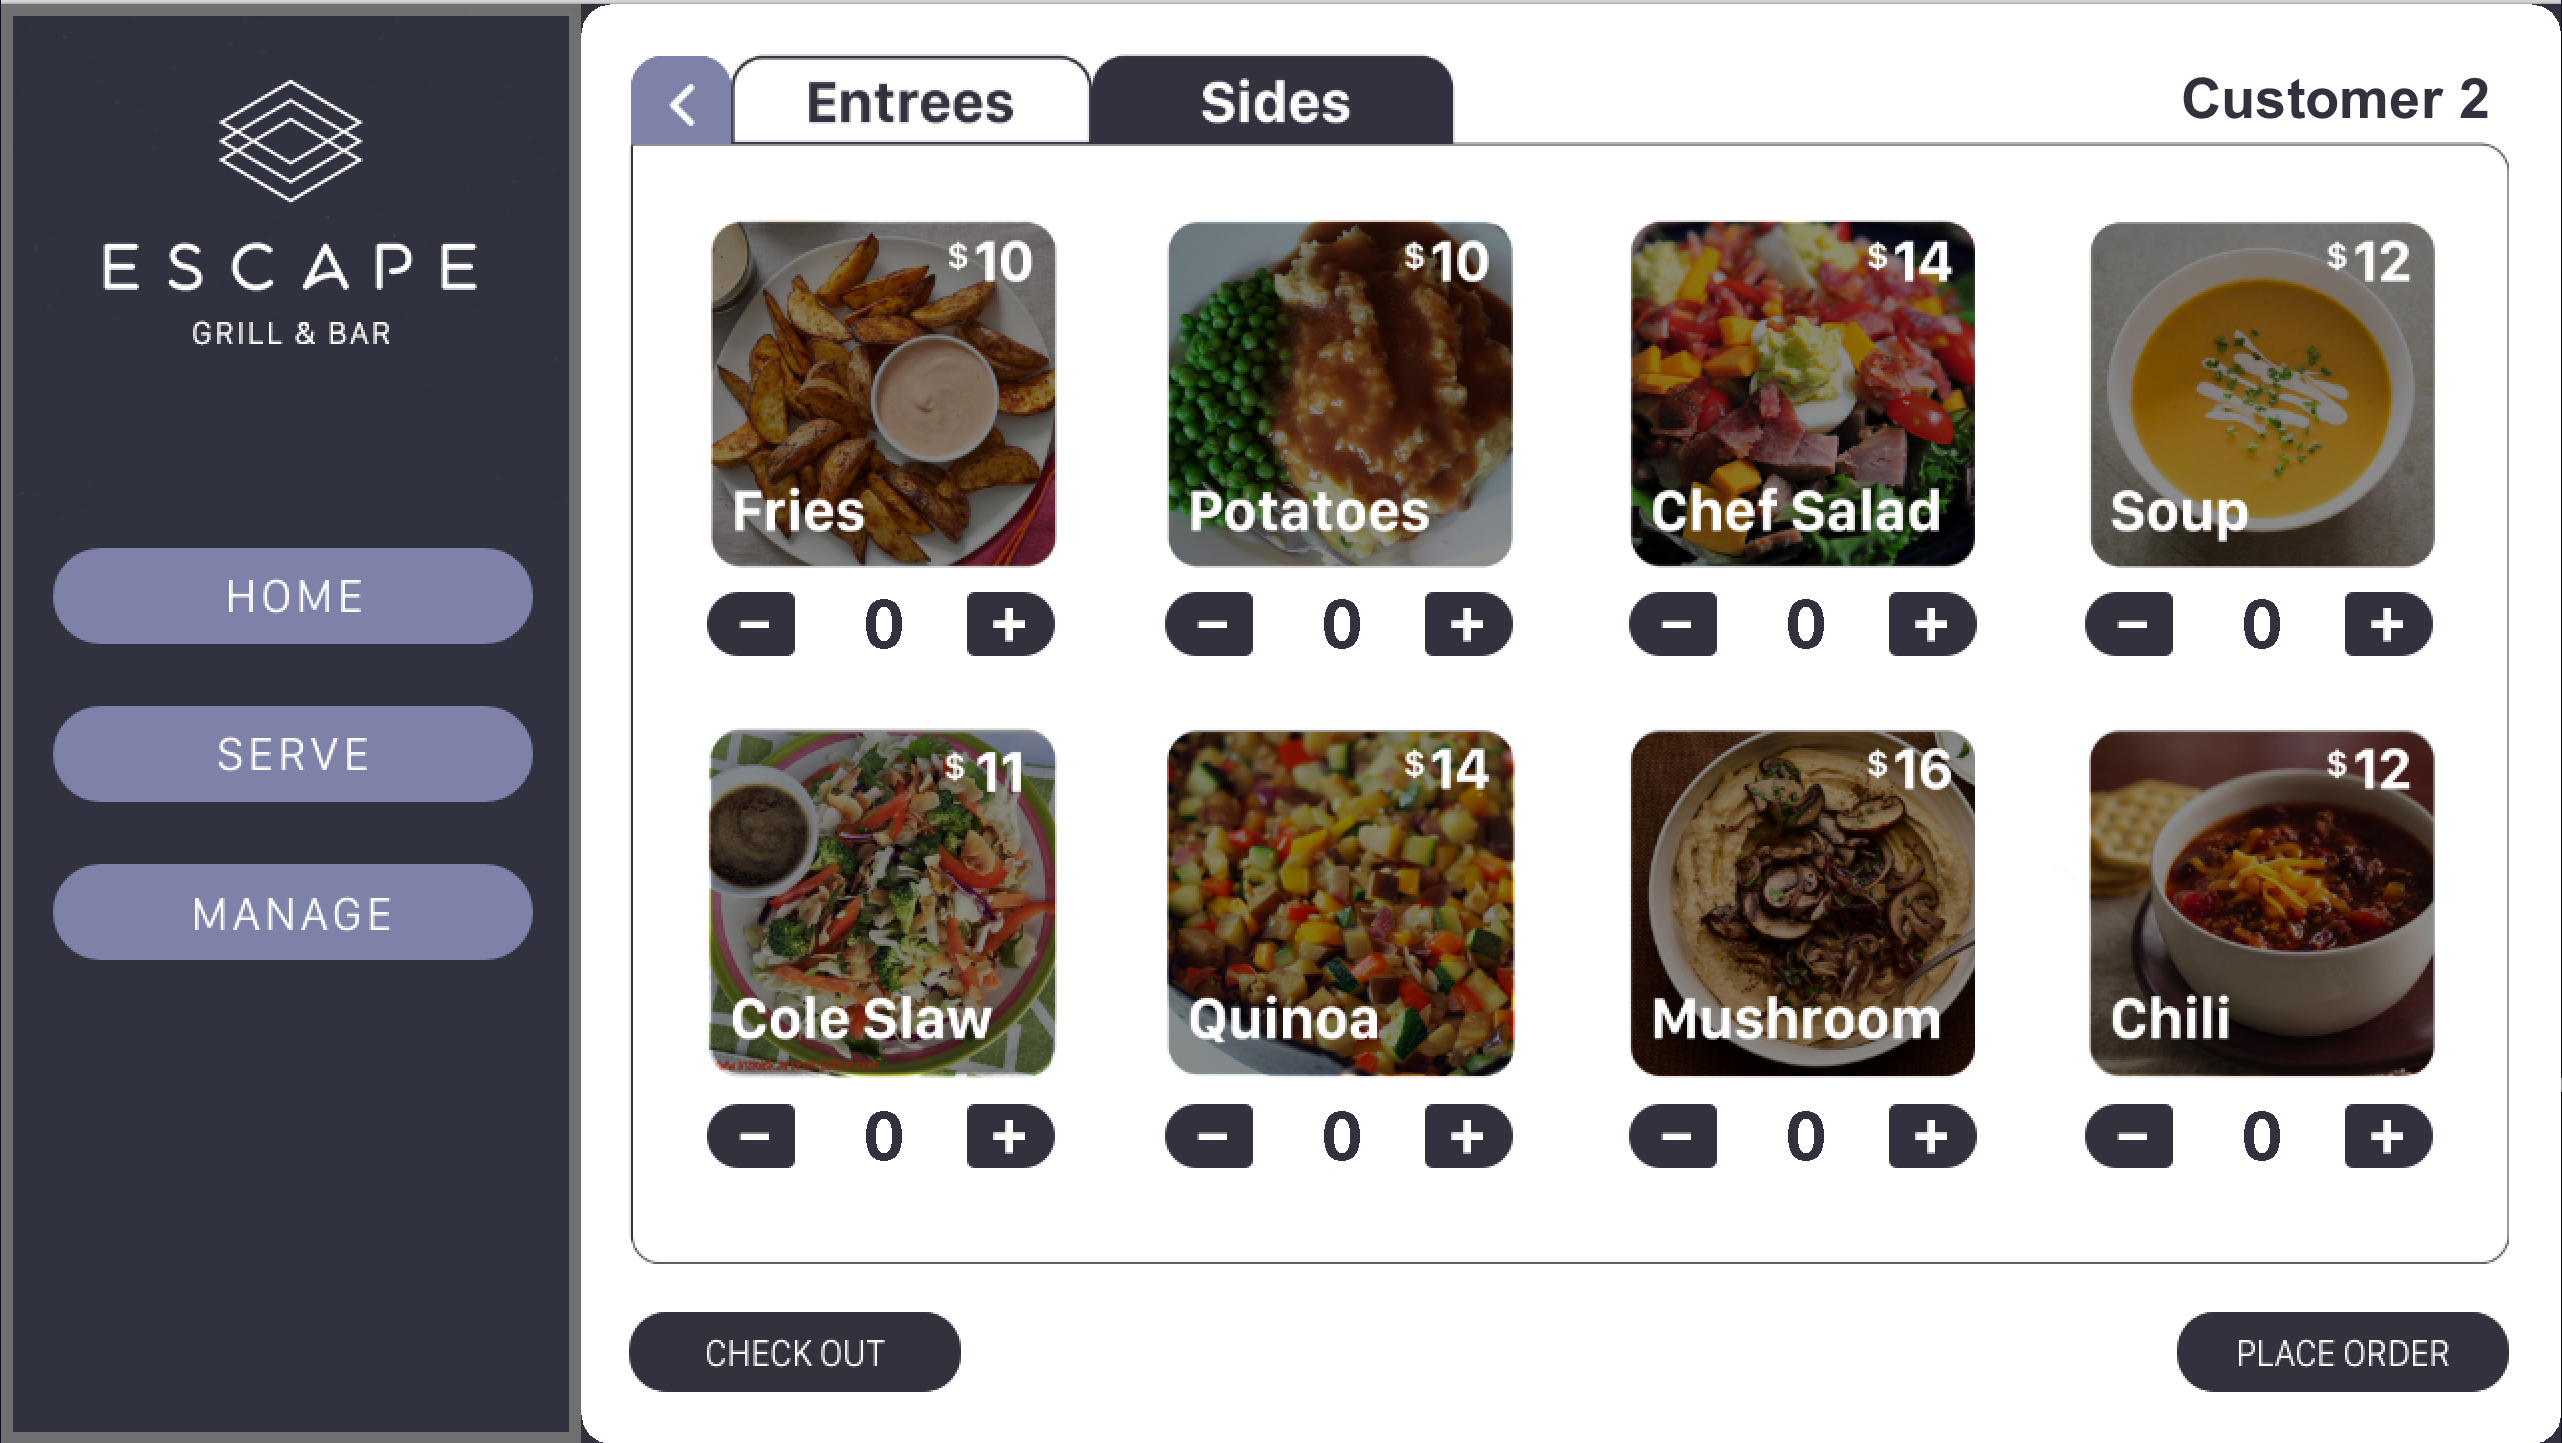 Menu for selecting sides